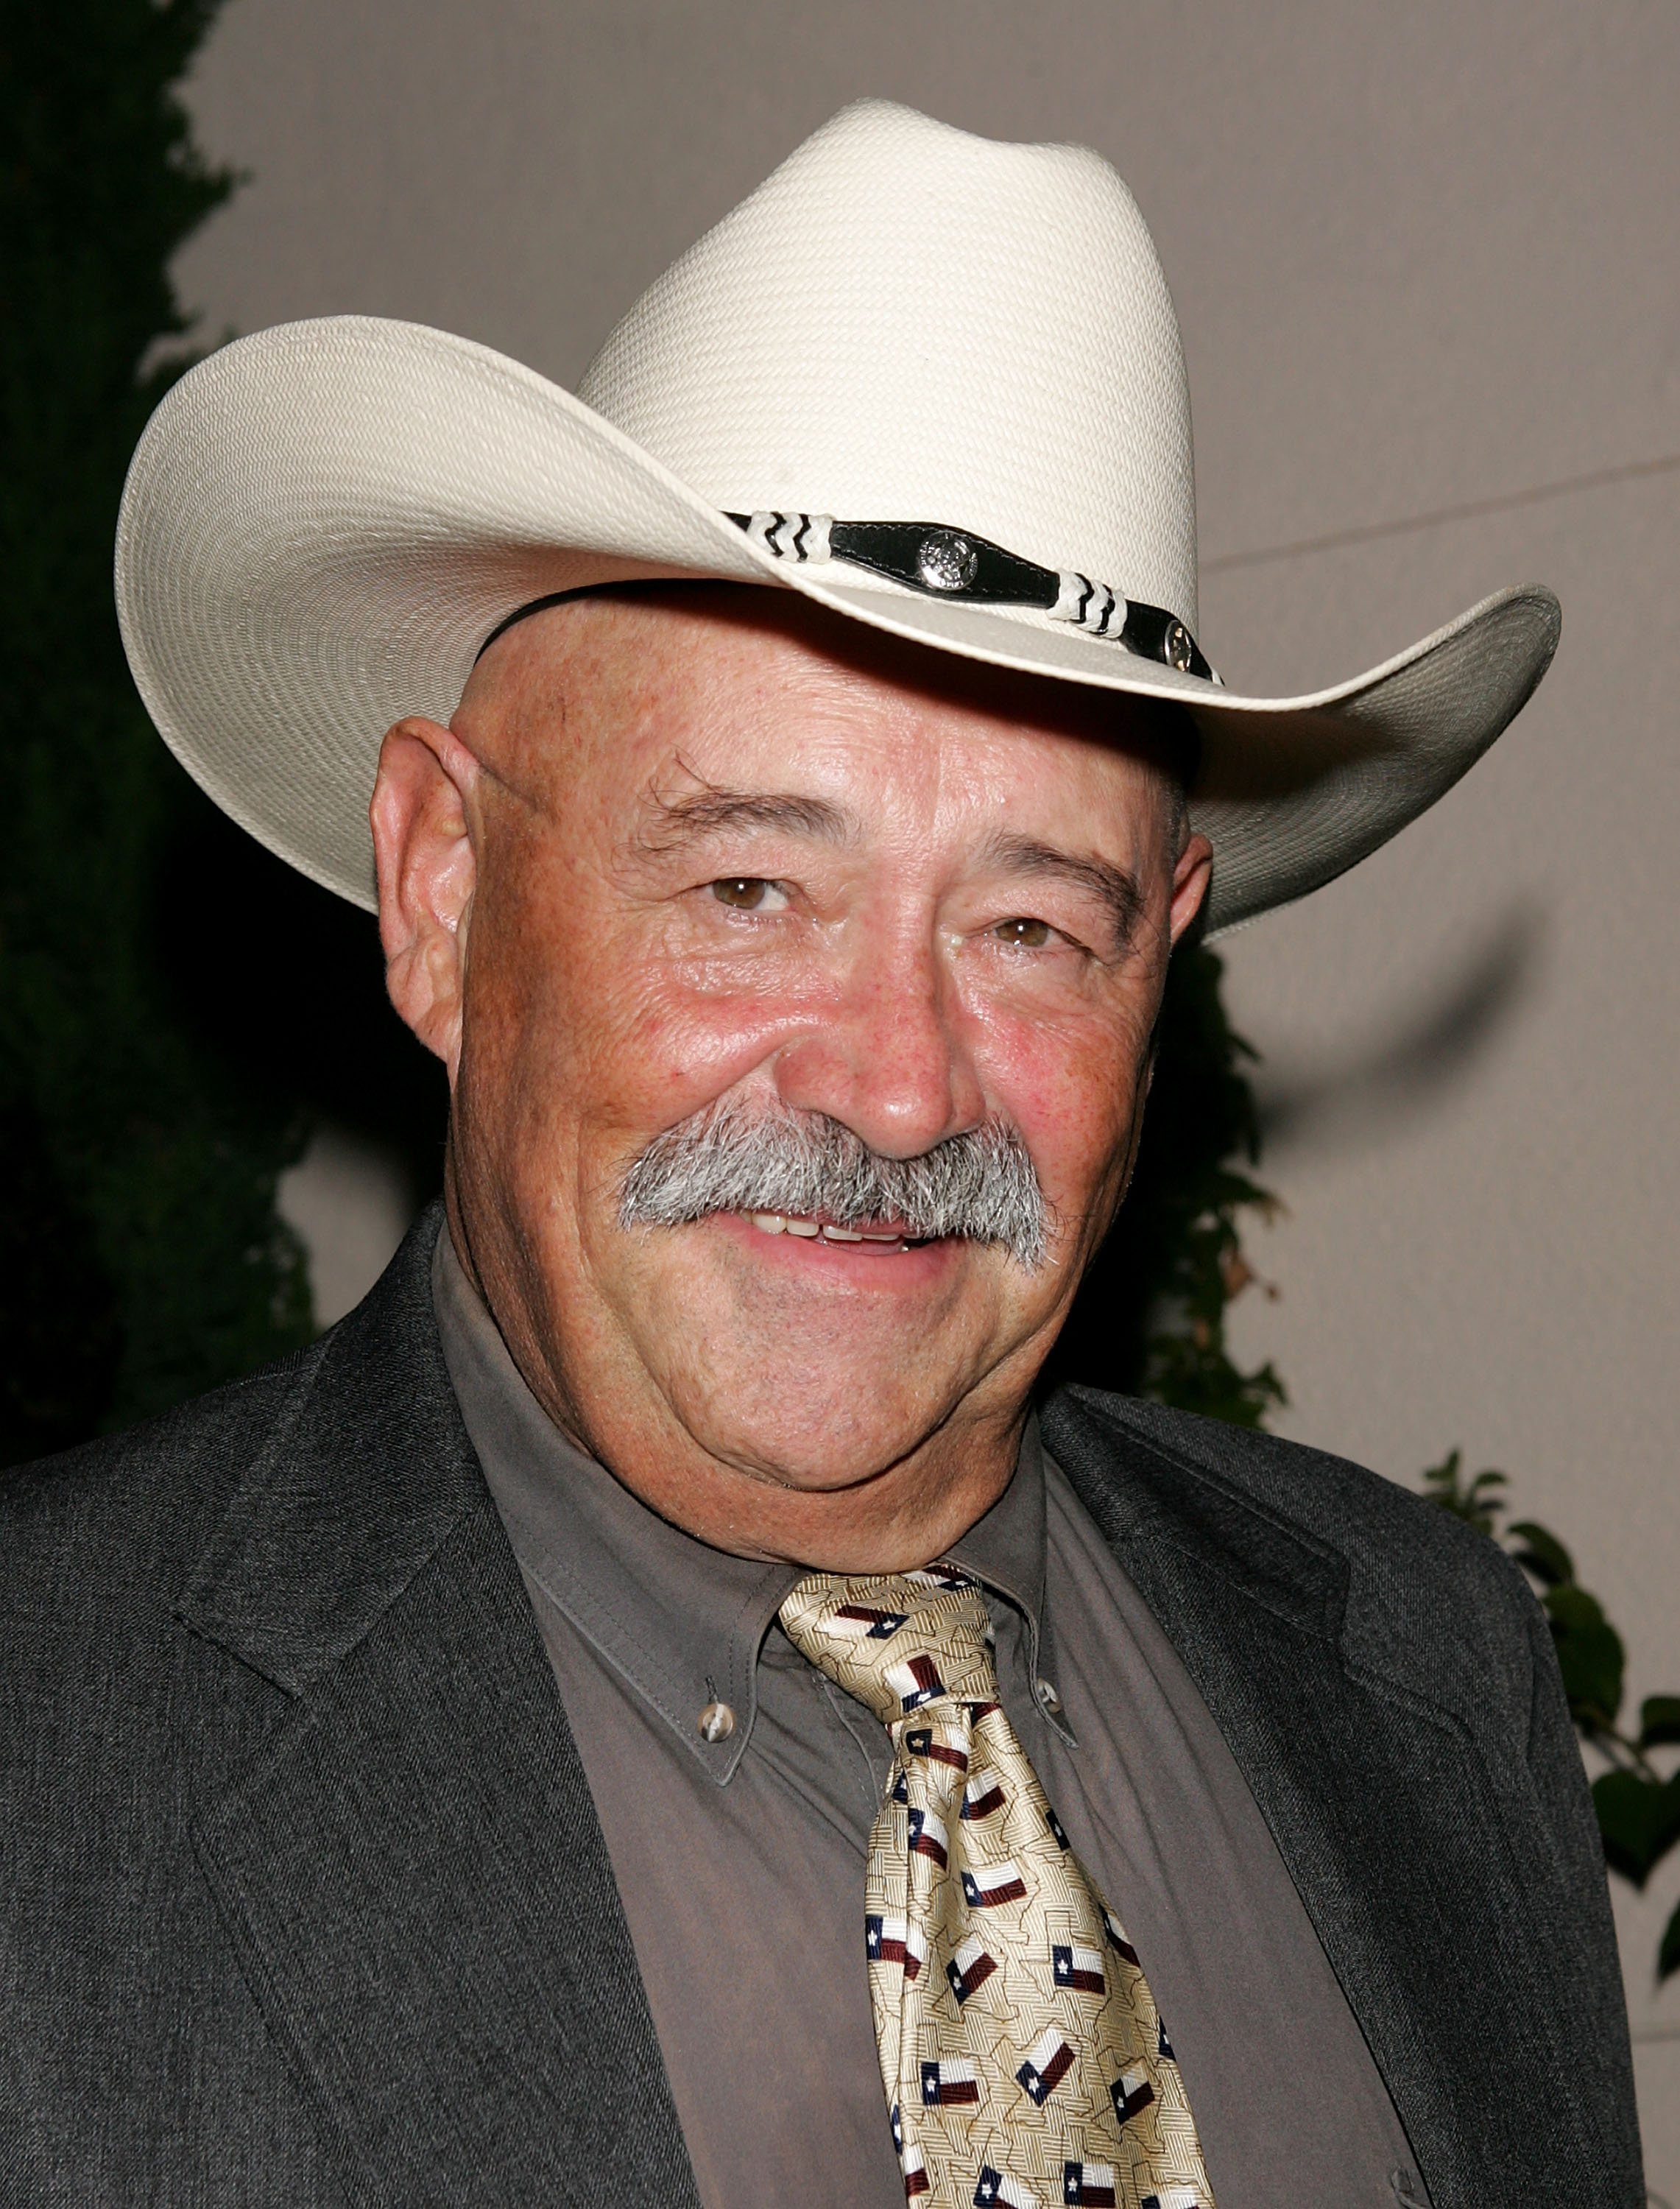 Barry Corbin. I Image: Getty Images.